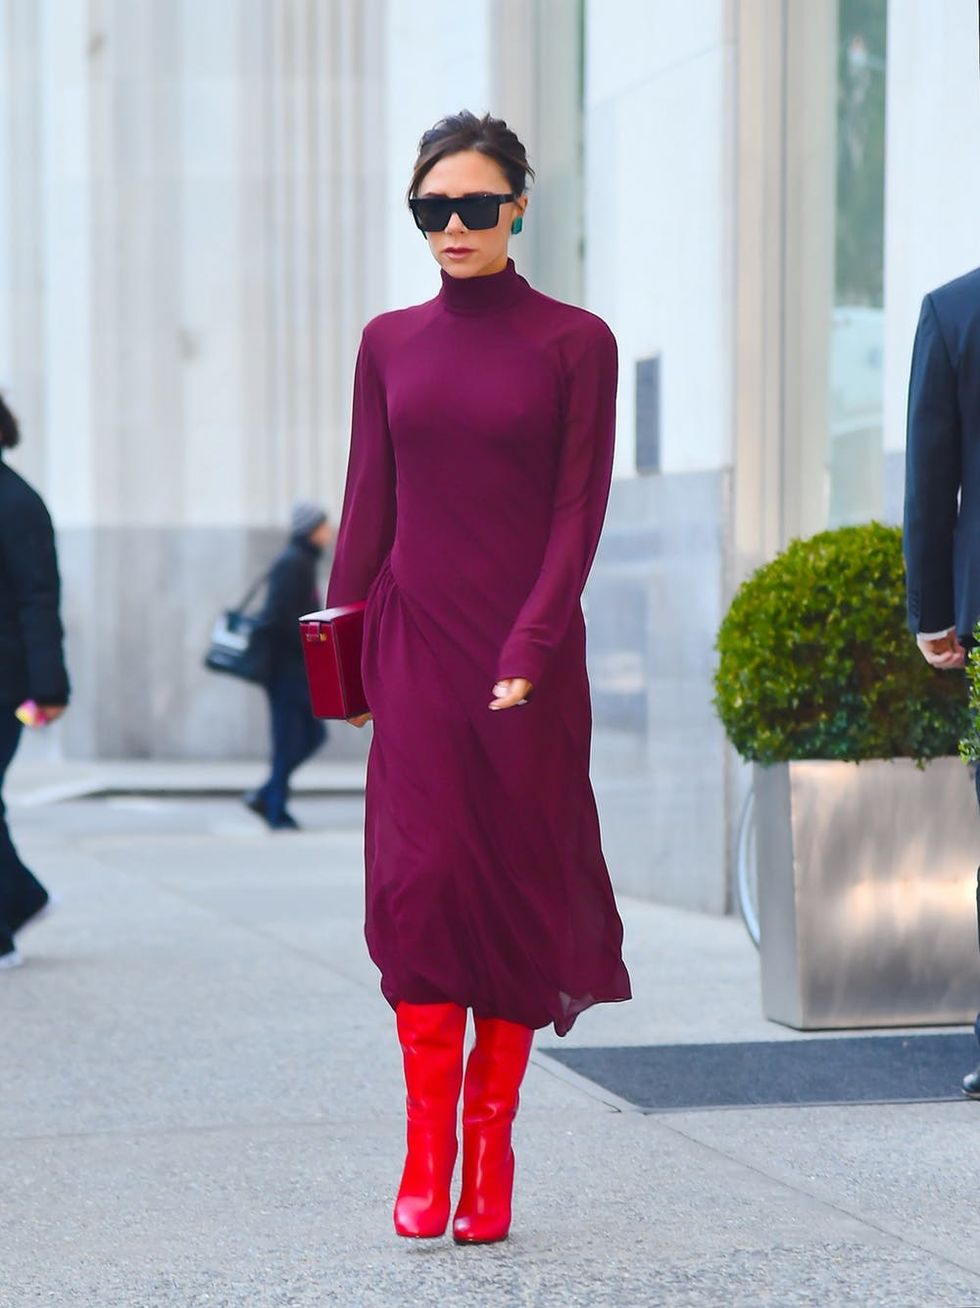 13 Style Lessons We Learned from Victoria Beckham - Brit + Co